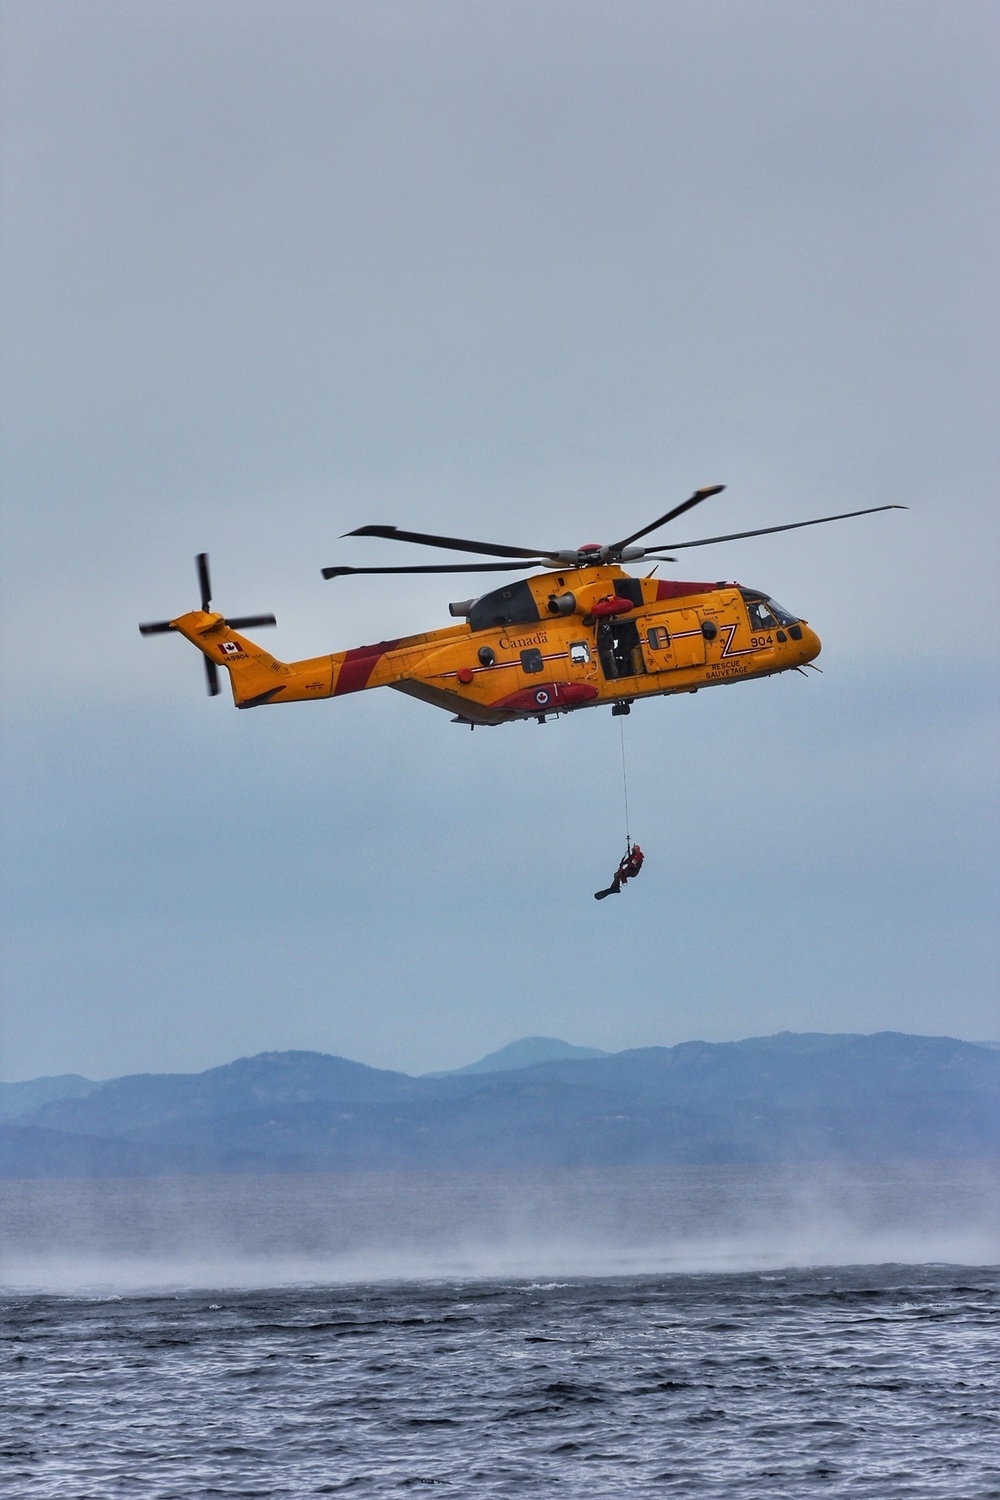 U.S. Coast Guard, Royal Canadian Air Force conduct joint search and rescue training north of Washington